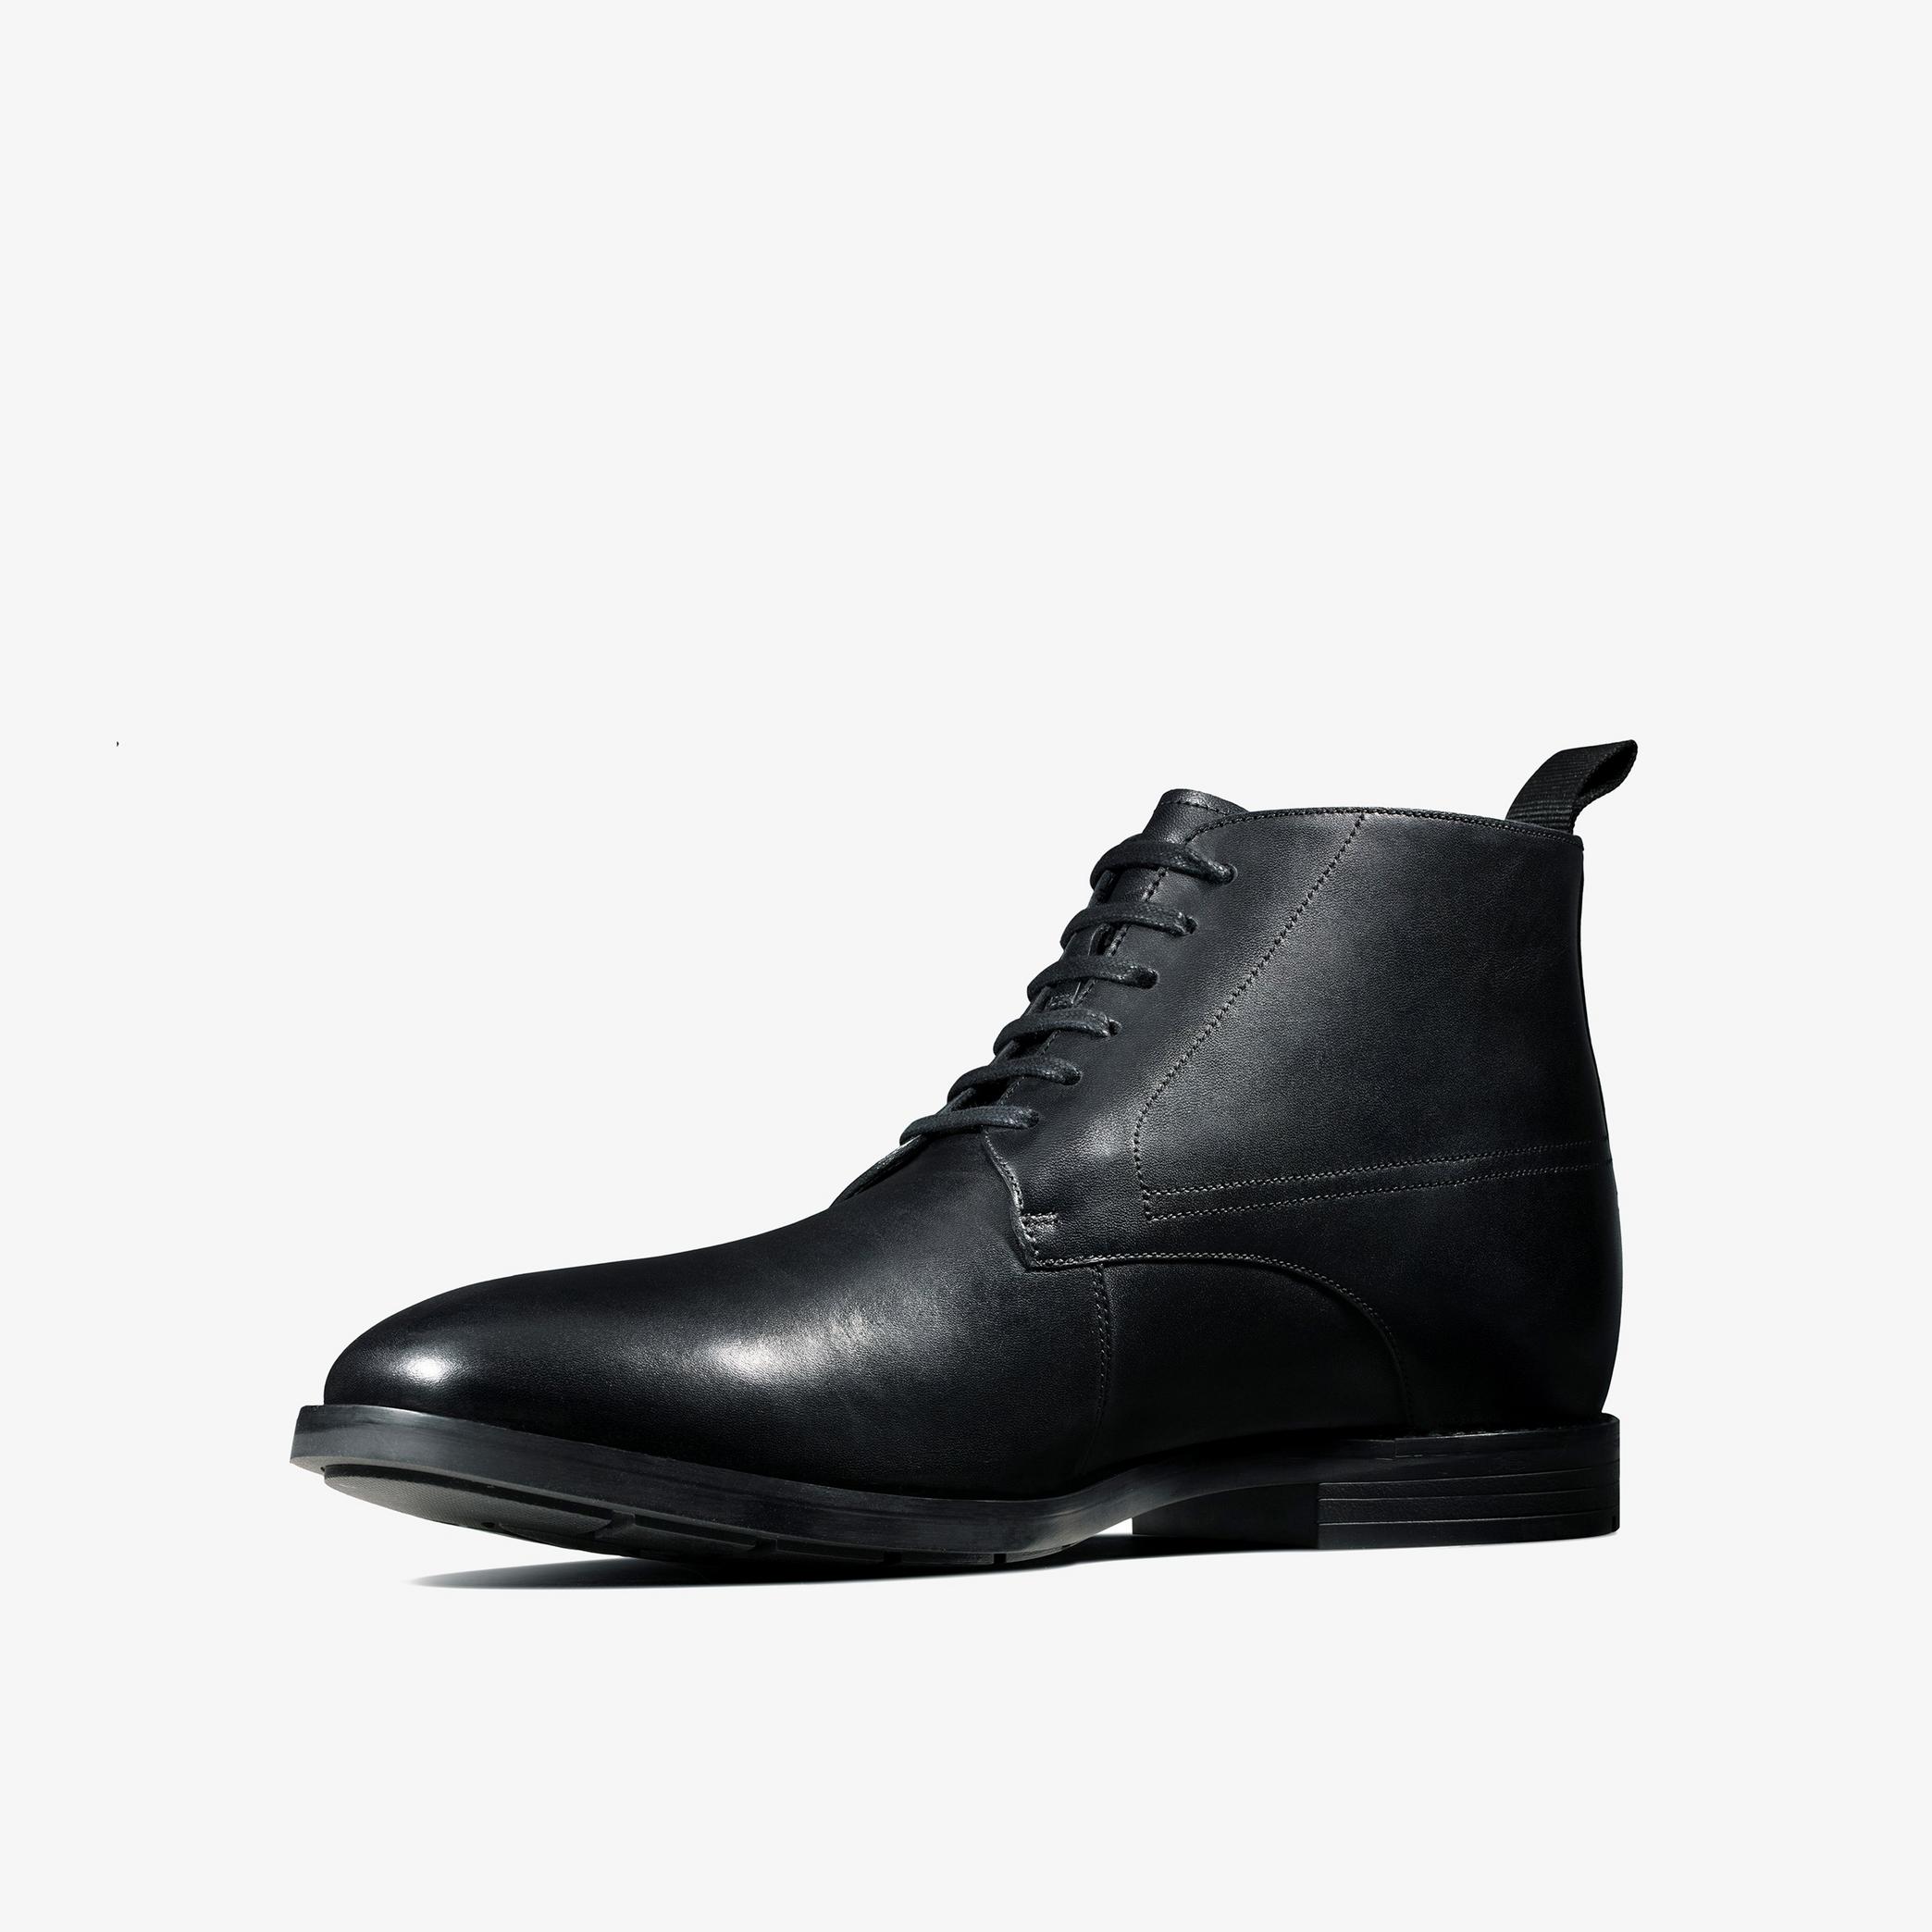 MENS Ronnie Up GORE-TEX Black Leather Boots | Clarks Outlet